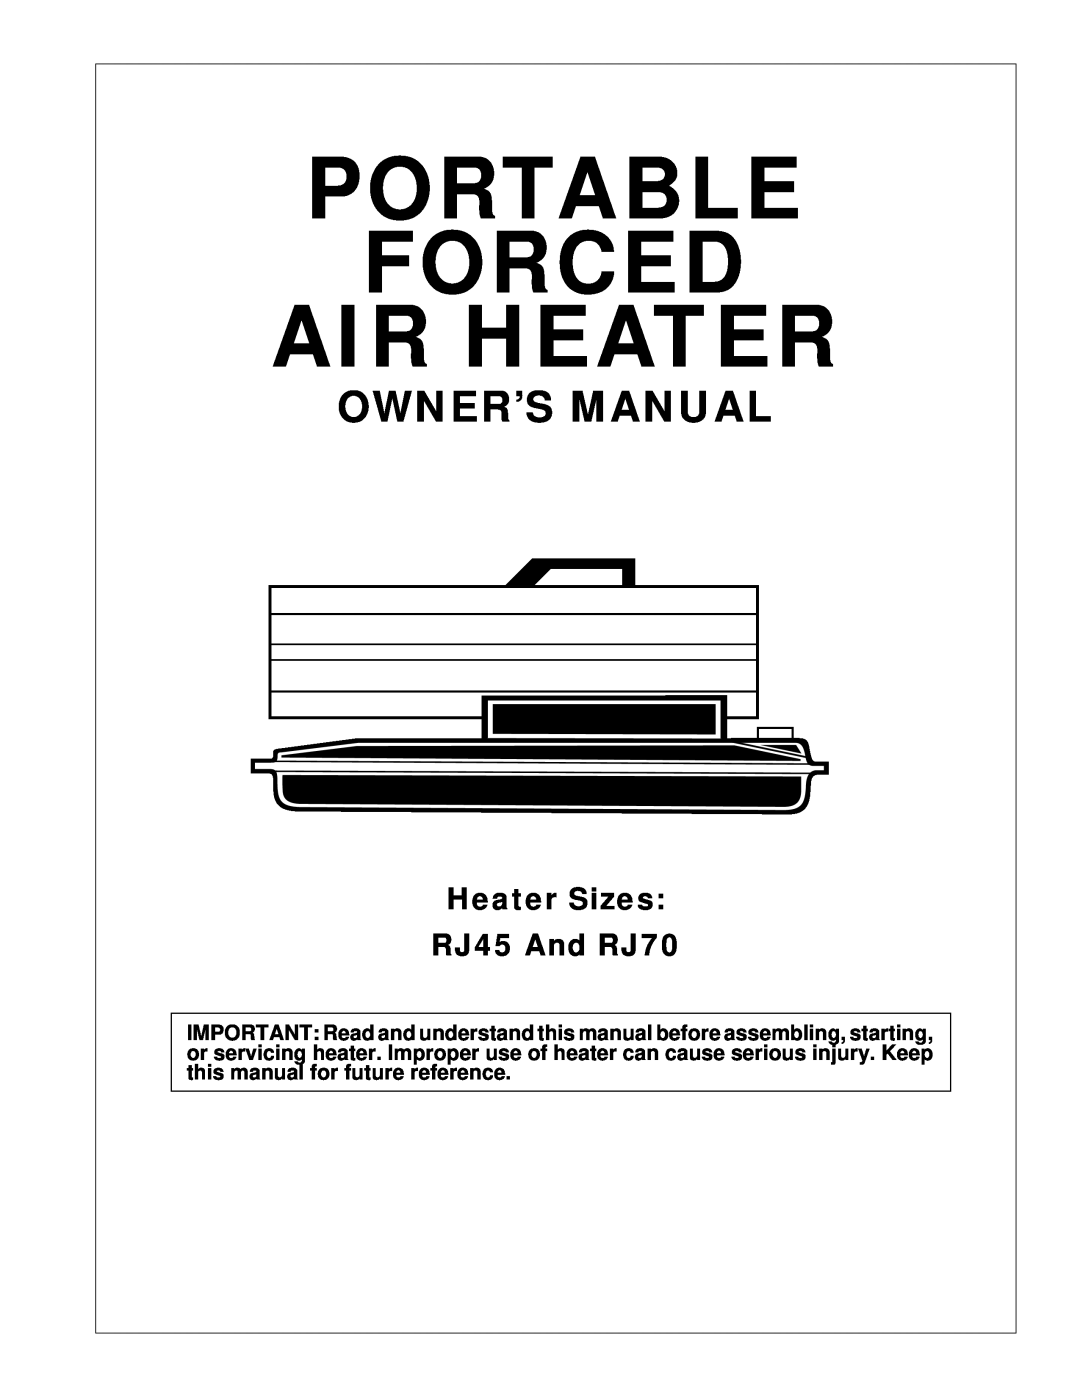 Desa owner manual Portable Forced Air Heater, Heater Sizes RJ45 And RJ70 